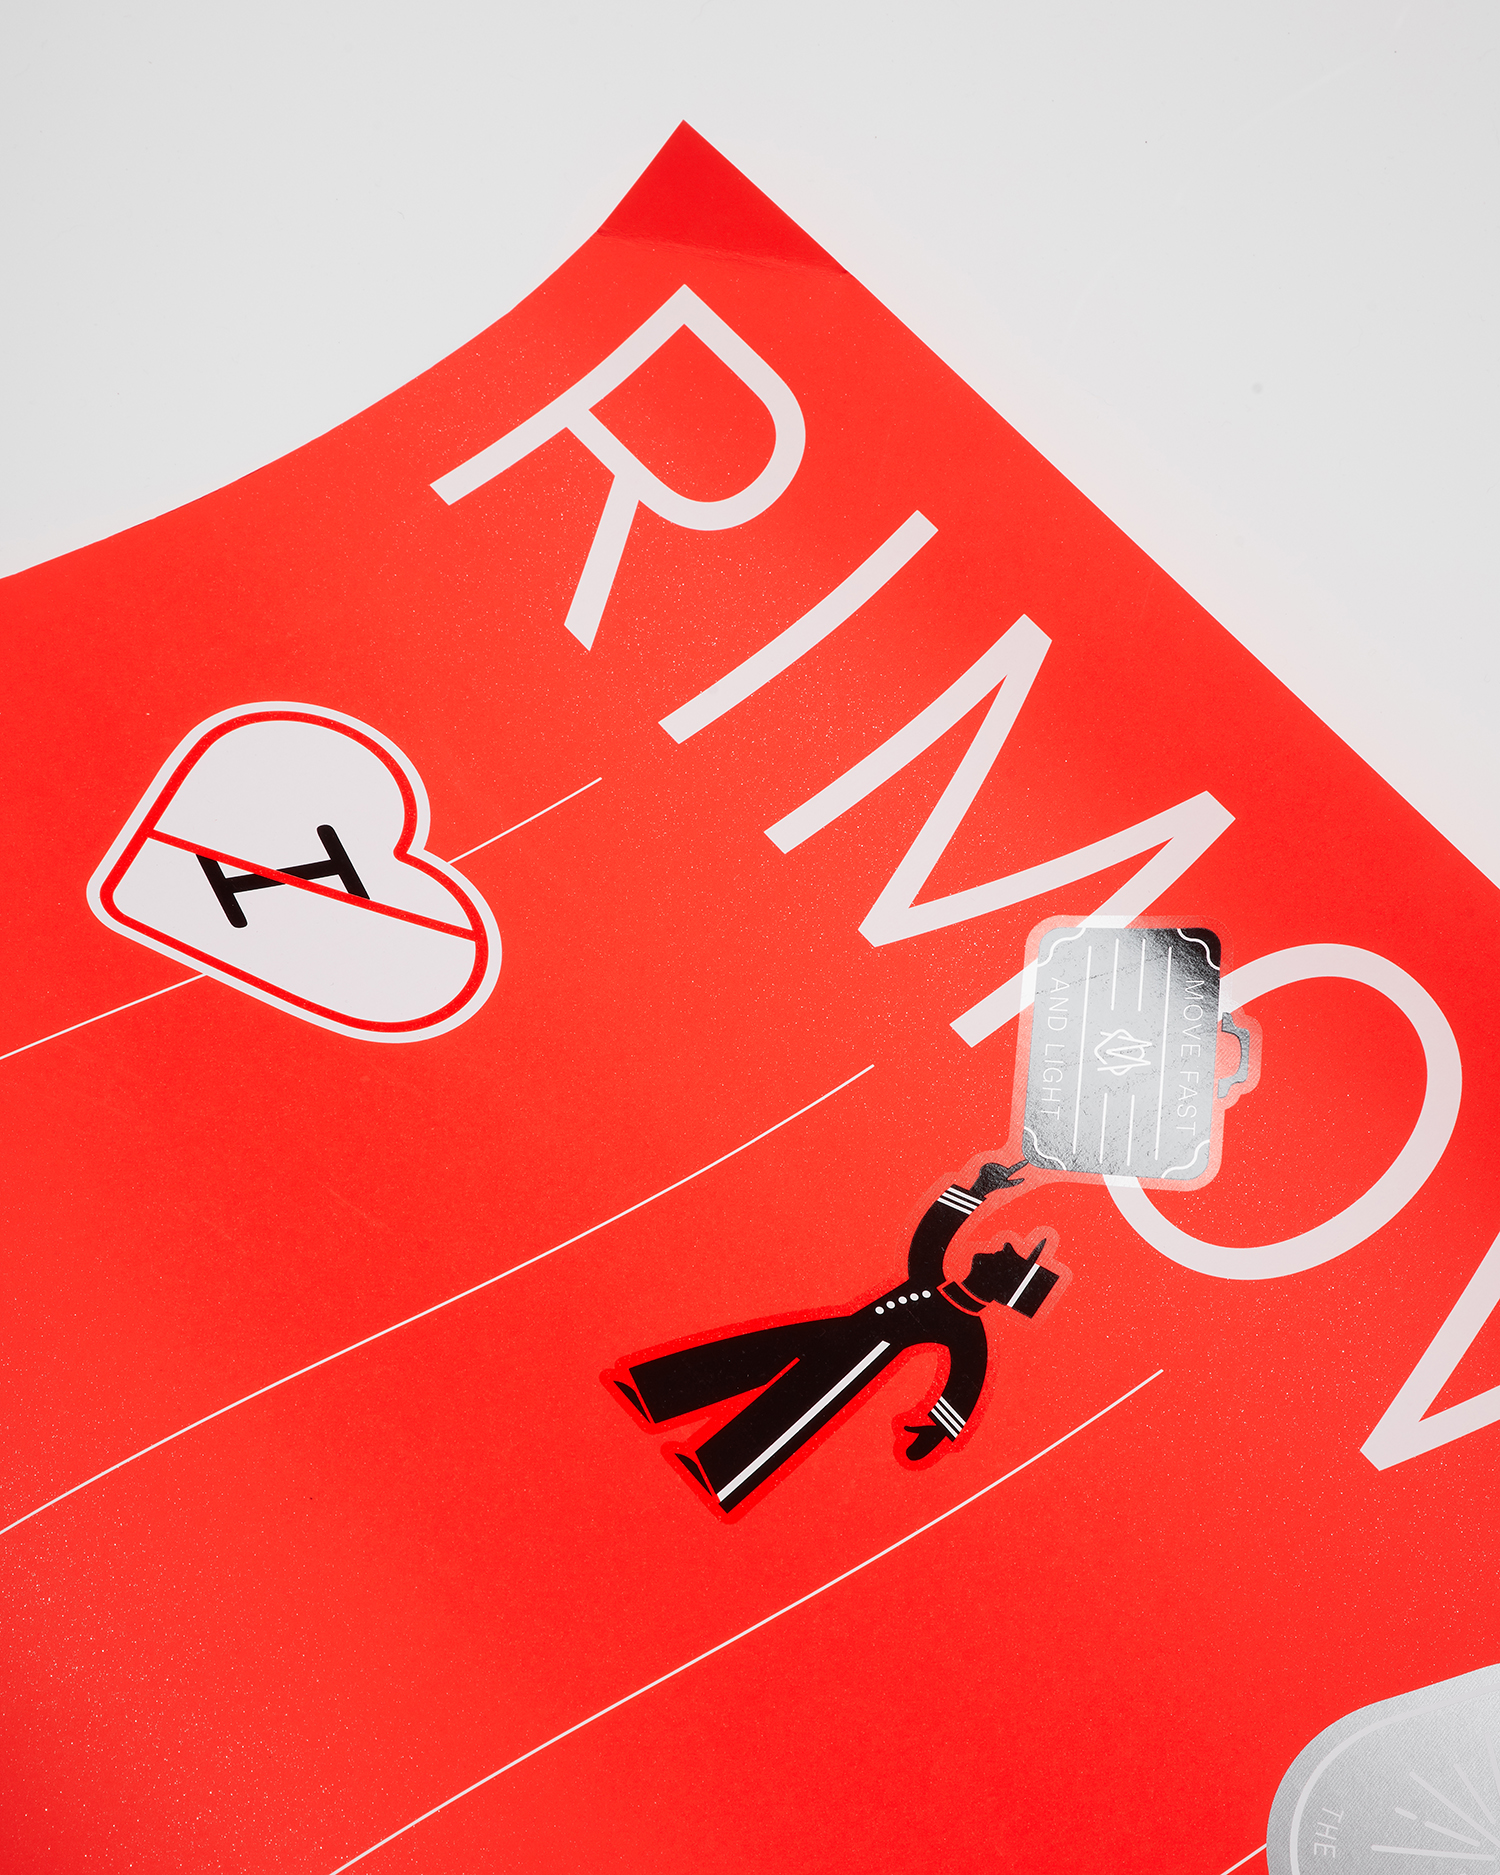 Poster Design Inspiration – Rimowa by Commission